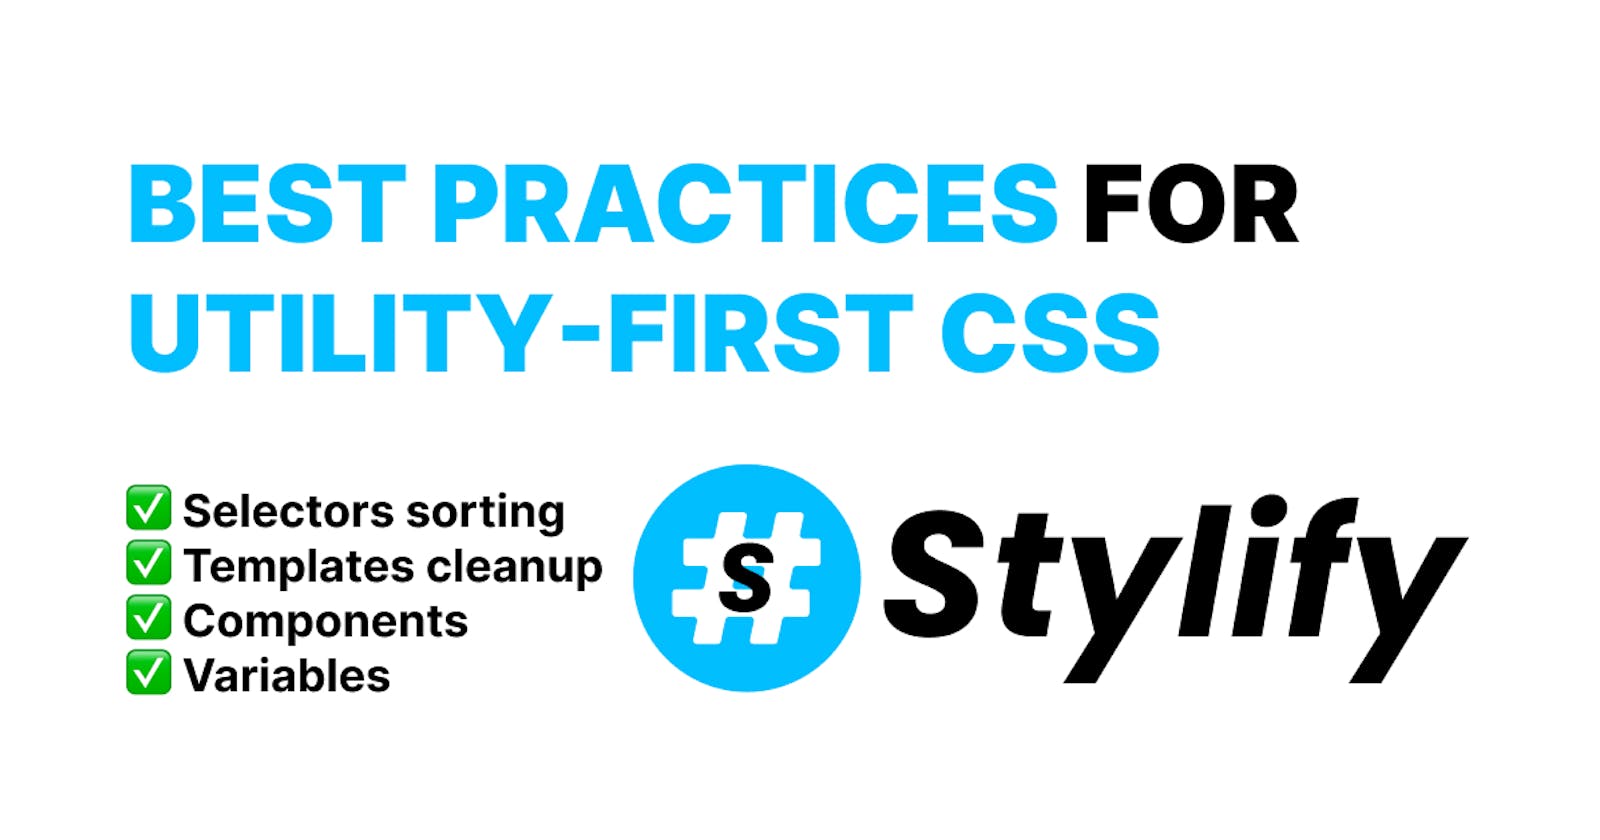 Best Practices for Utility-First CSS